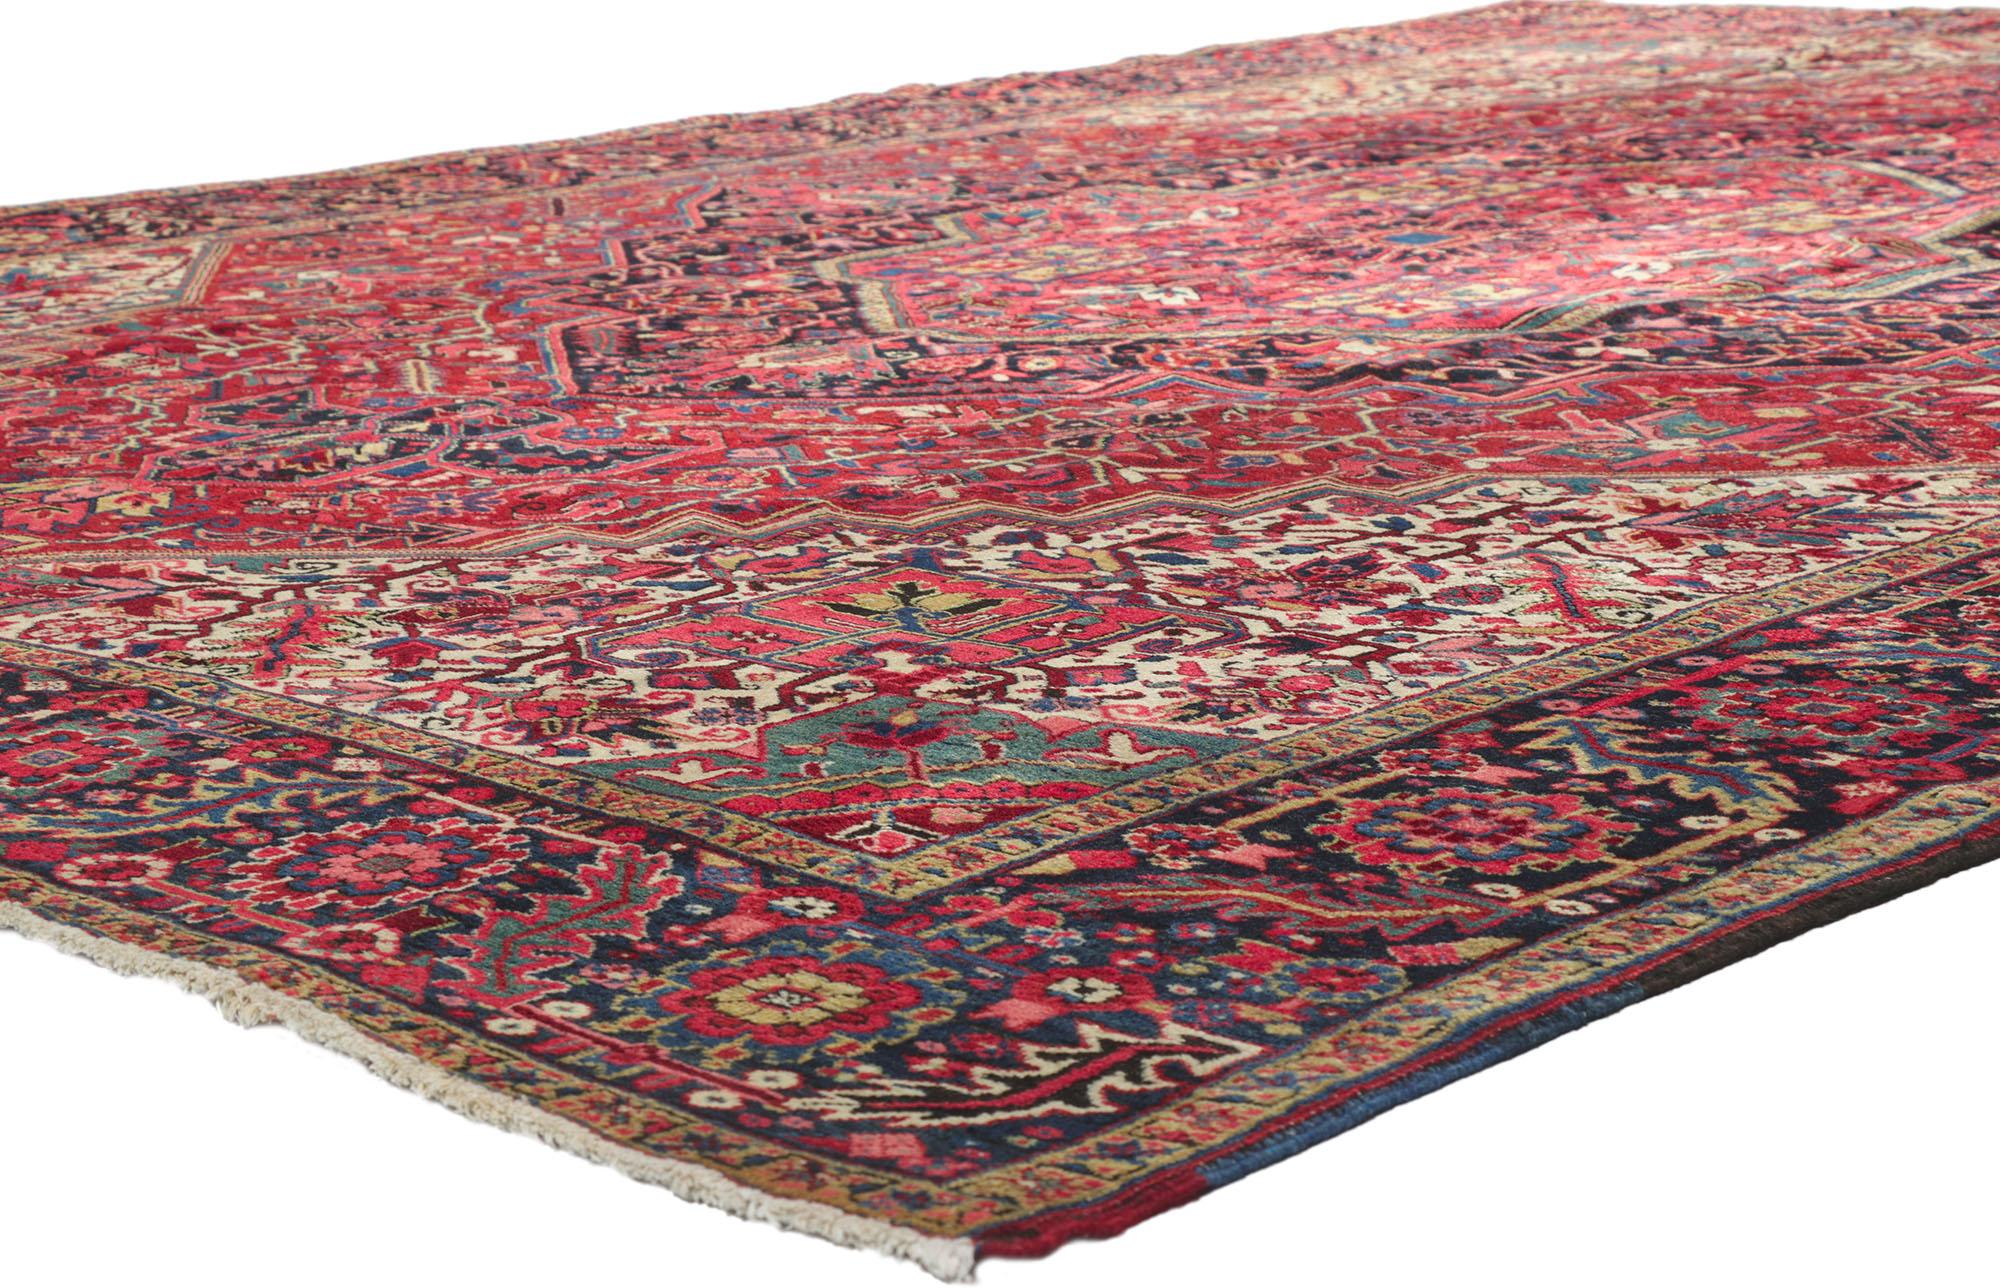 53777 Antique Persian Heriz rug, 11'05 x 14'06. Abrash. Hand-knotted wool. Made in Iran.